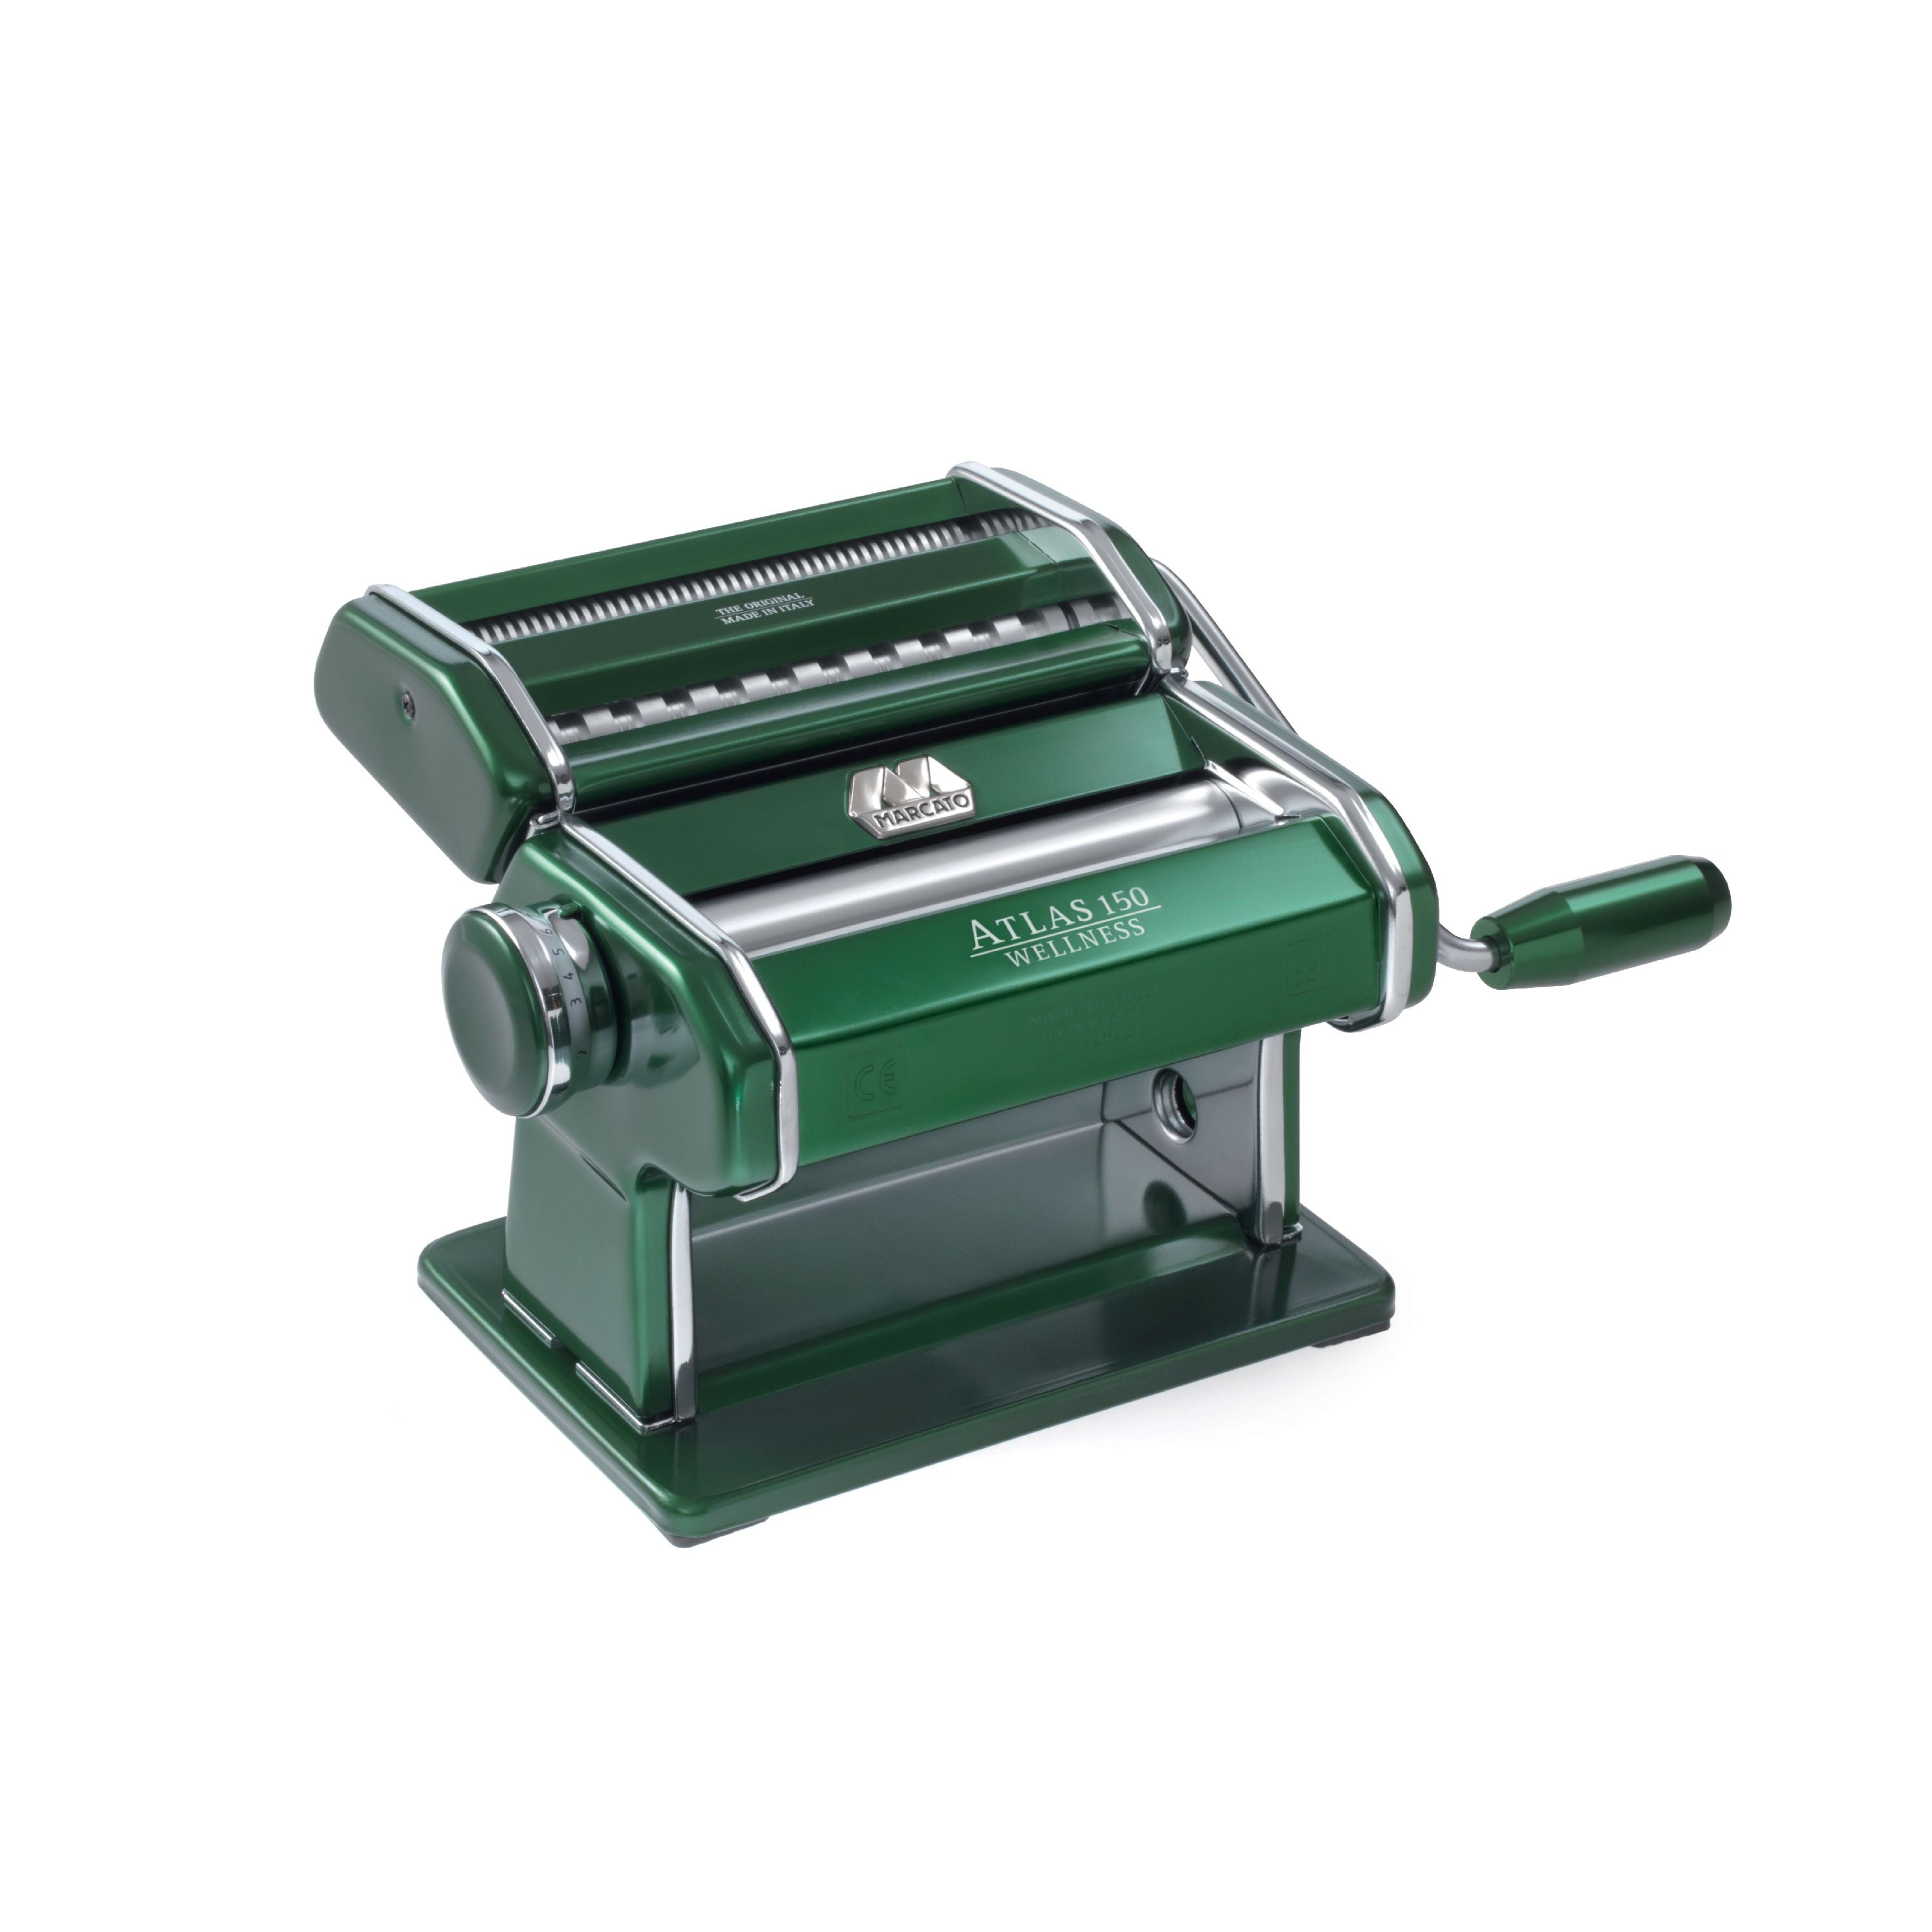 Marcato Atlas Made in Italy Pasta Machine, Made in Italy, Green, Includes Pasta Cutter, Crank, and - Walmart.com